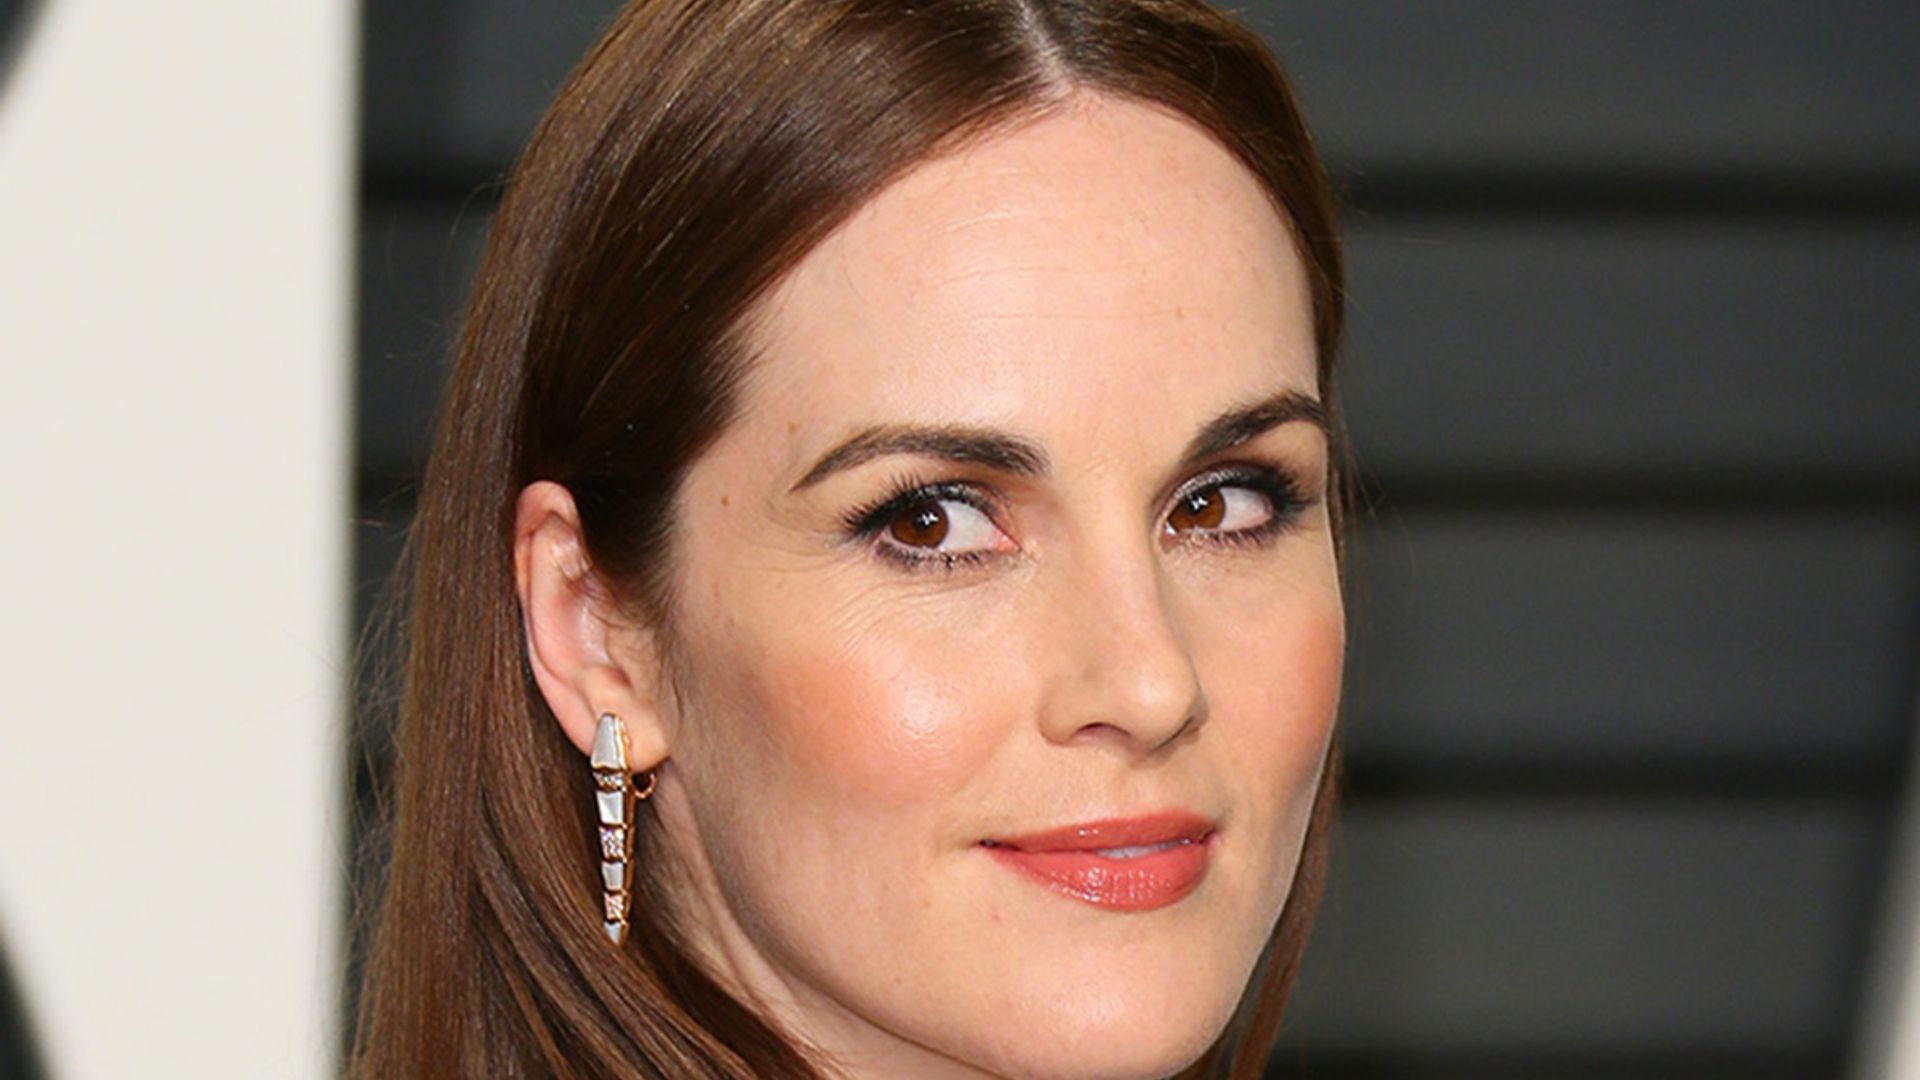 Downton Abbey star Michelle Dockery opens up about her late fiancé: 'I consider myself a widow'